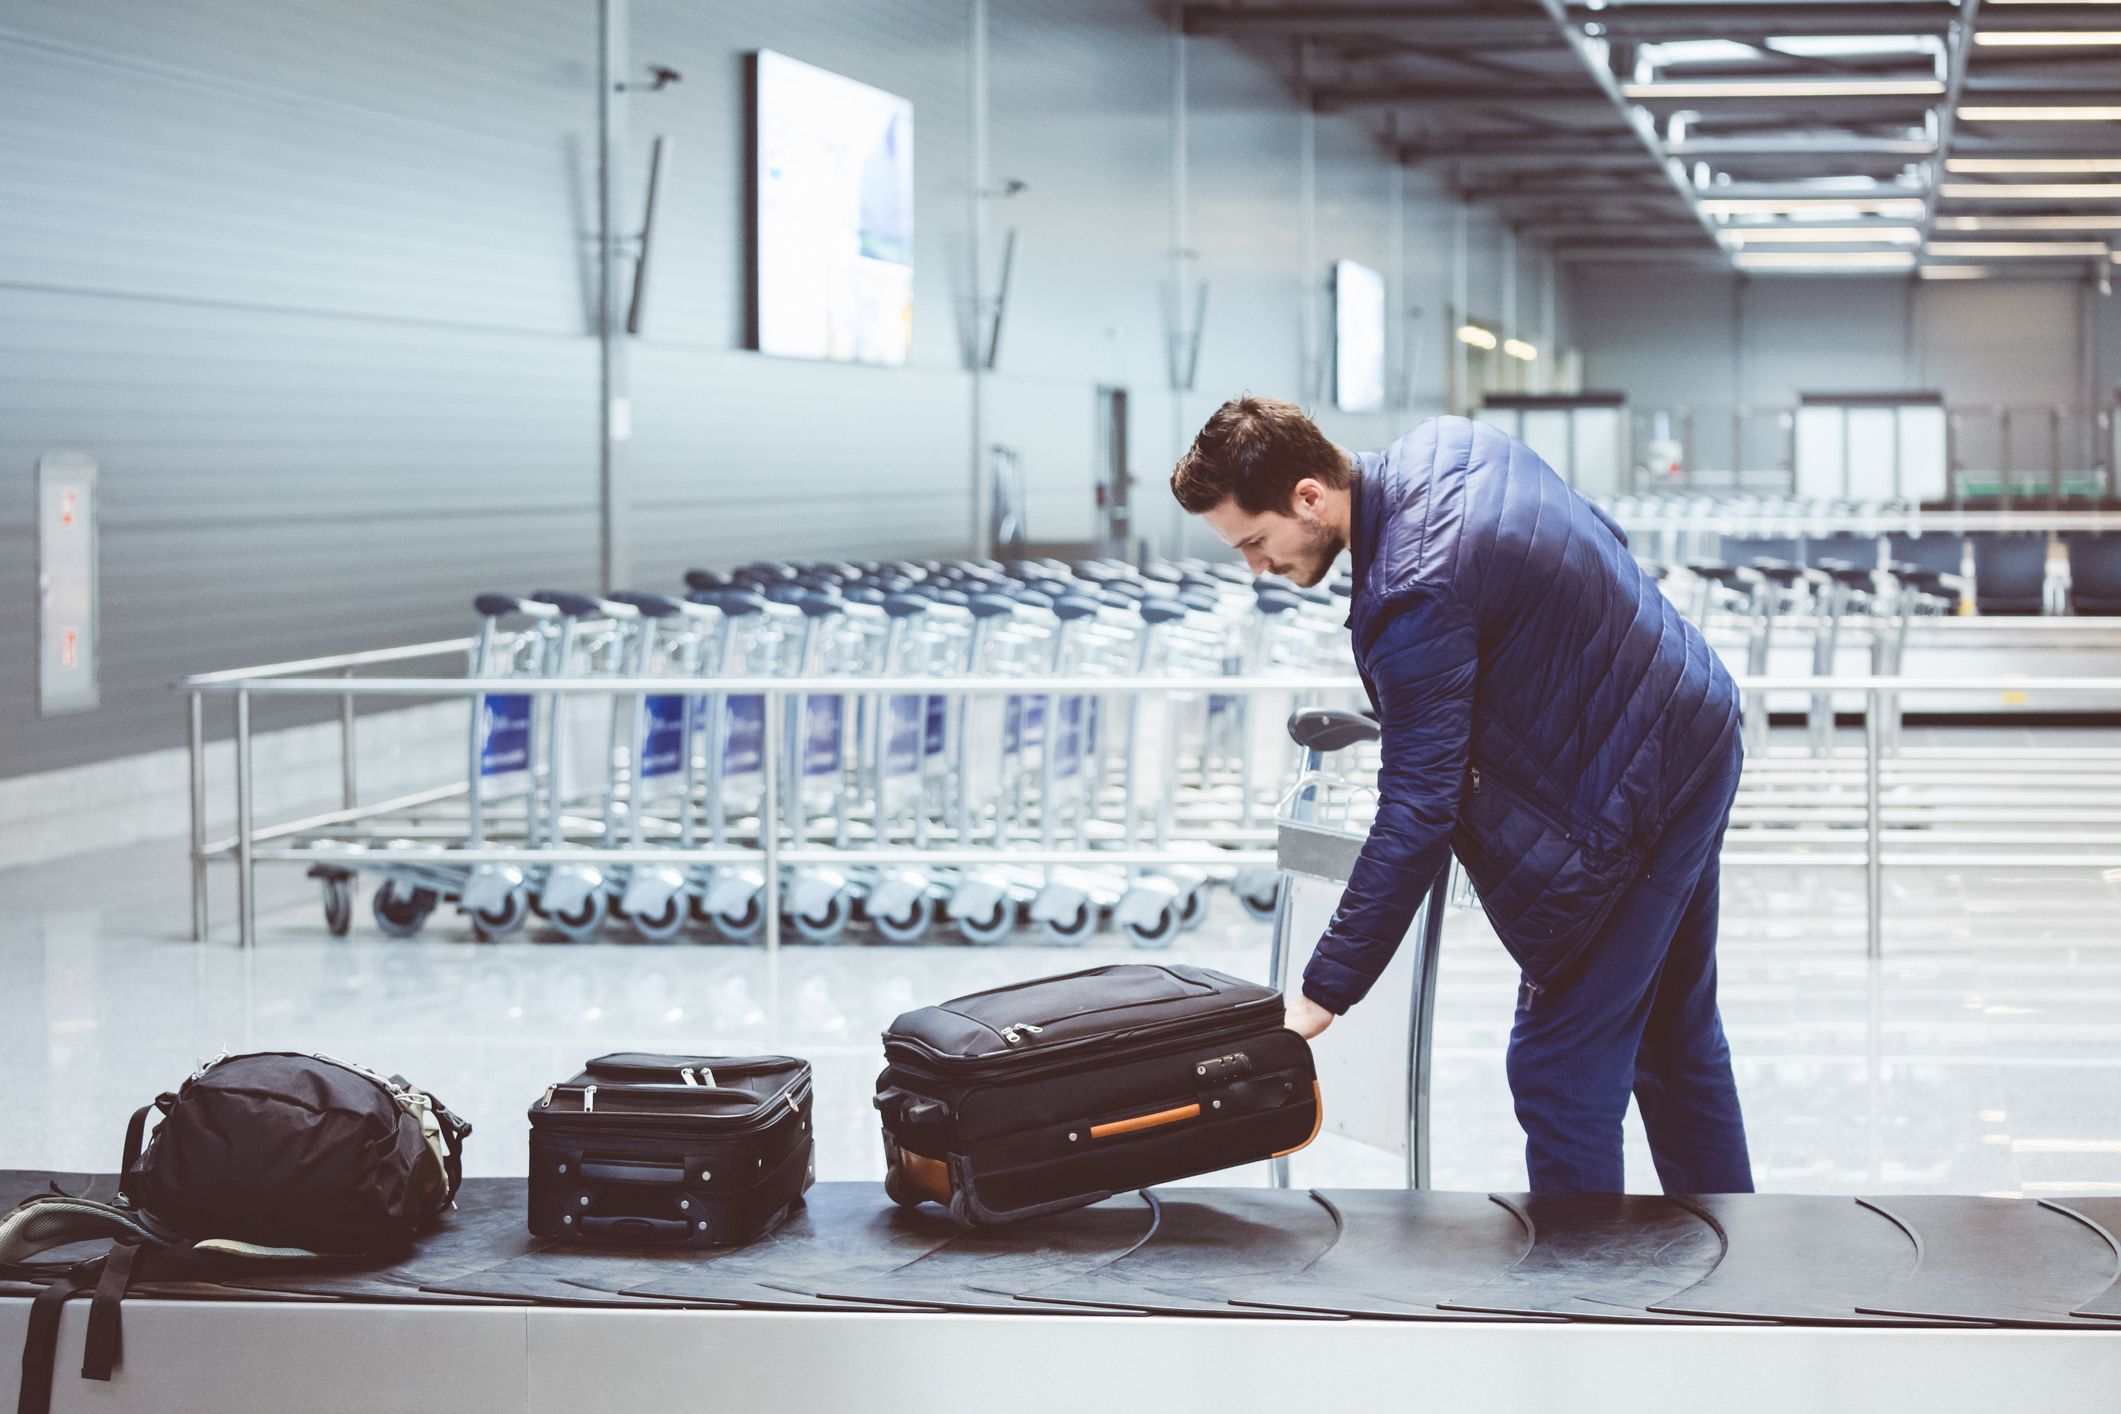 https://hips.hearstapps.com/hmg-prod.s3.amazonaws.com/images/young-man-picking-luggage-from-conveyor-belt-in-royalty-free-image-1657574372.jpg